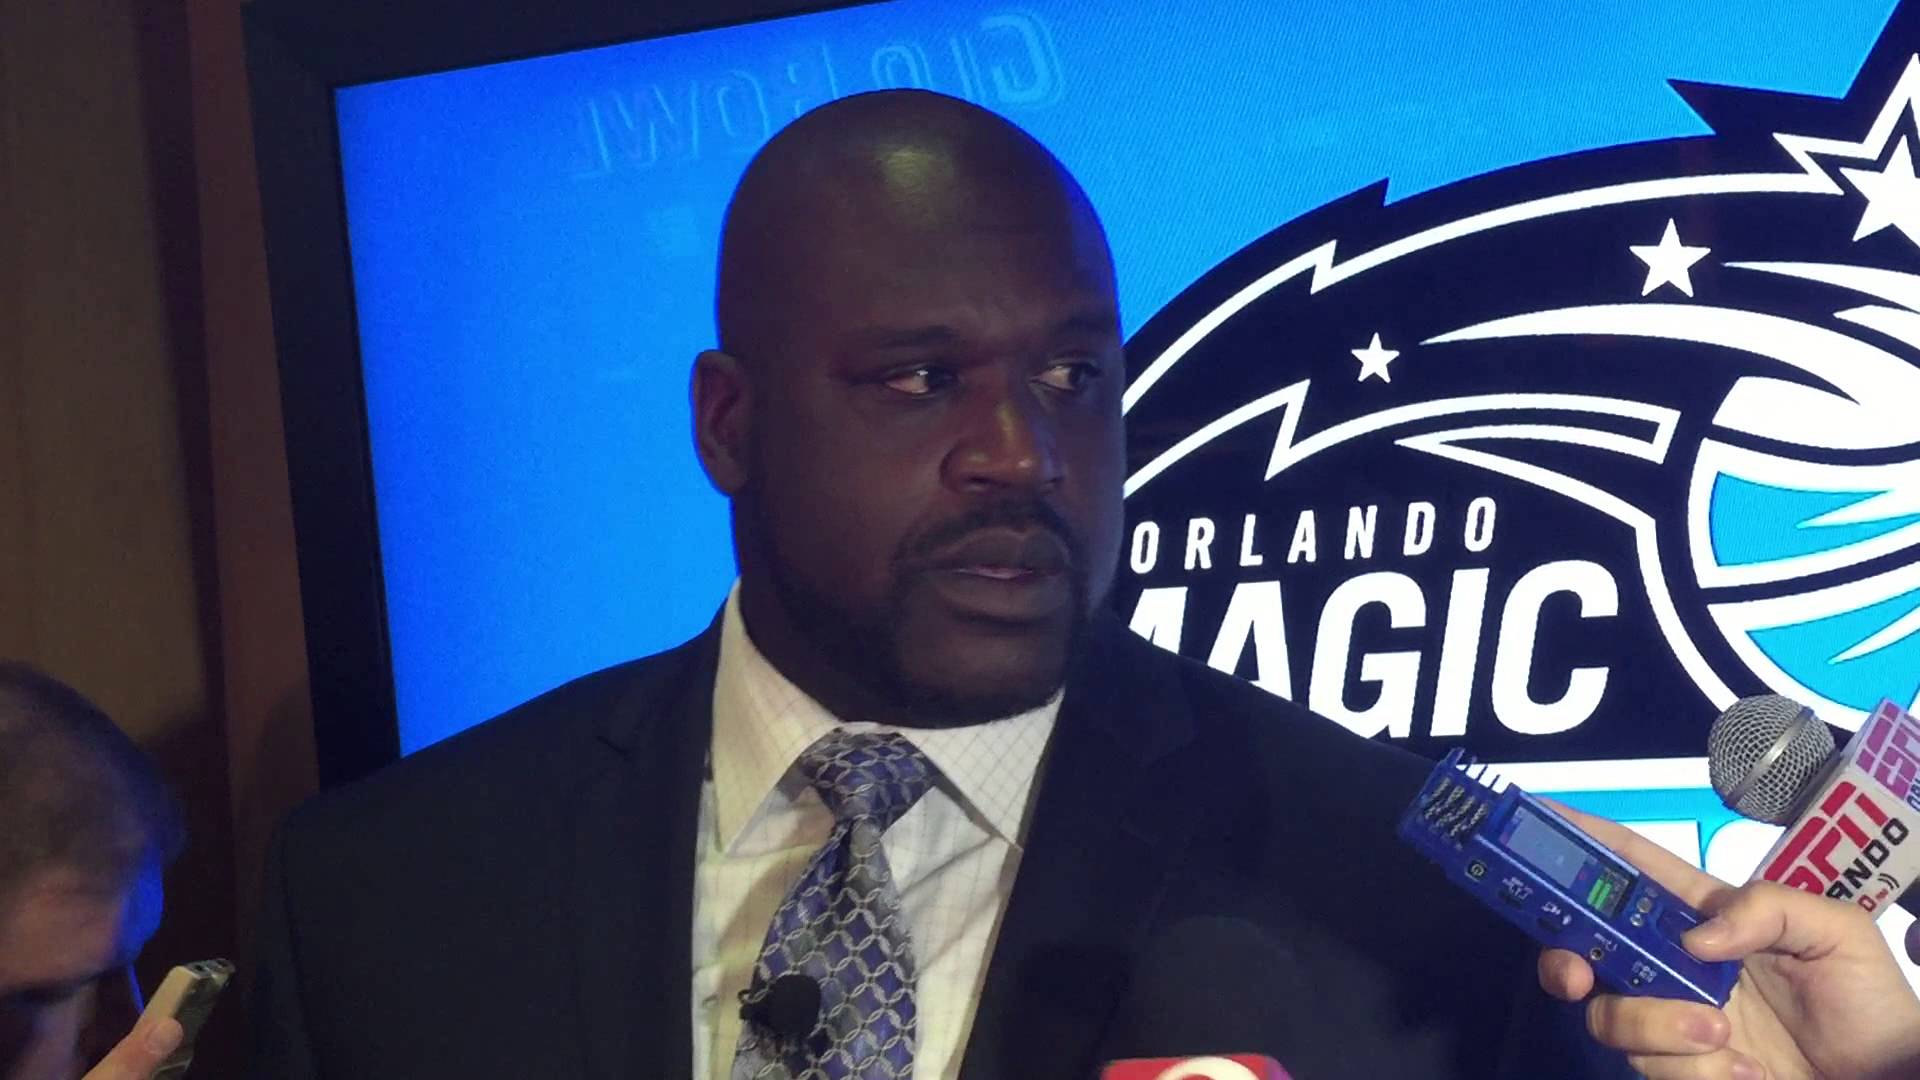 Shaq wishes he had more patience & stayed longer in Orlando